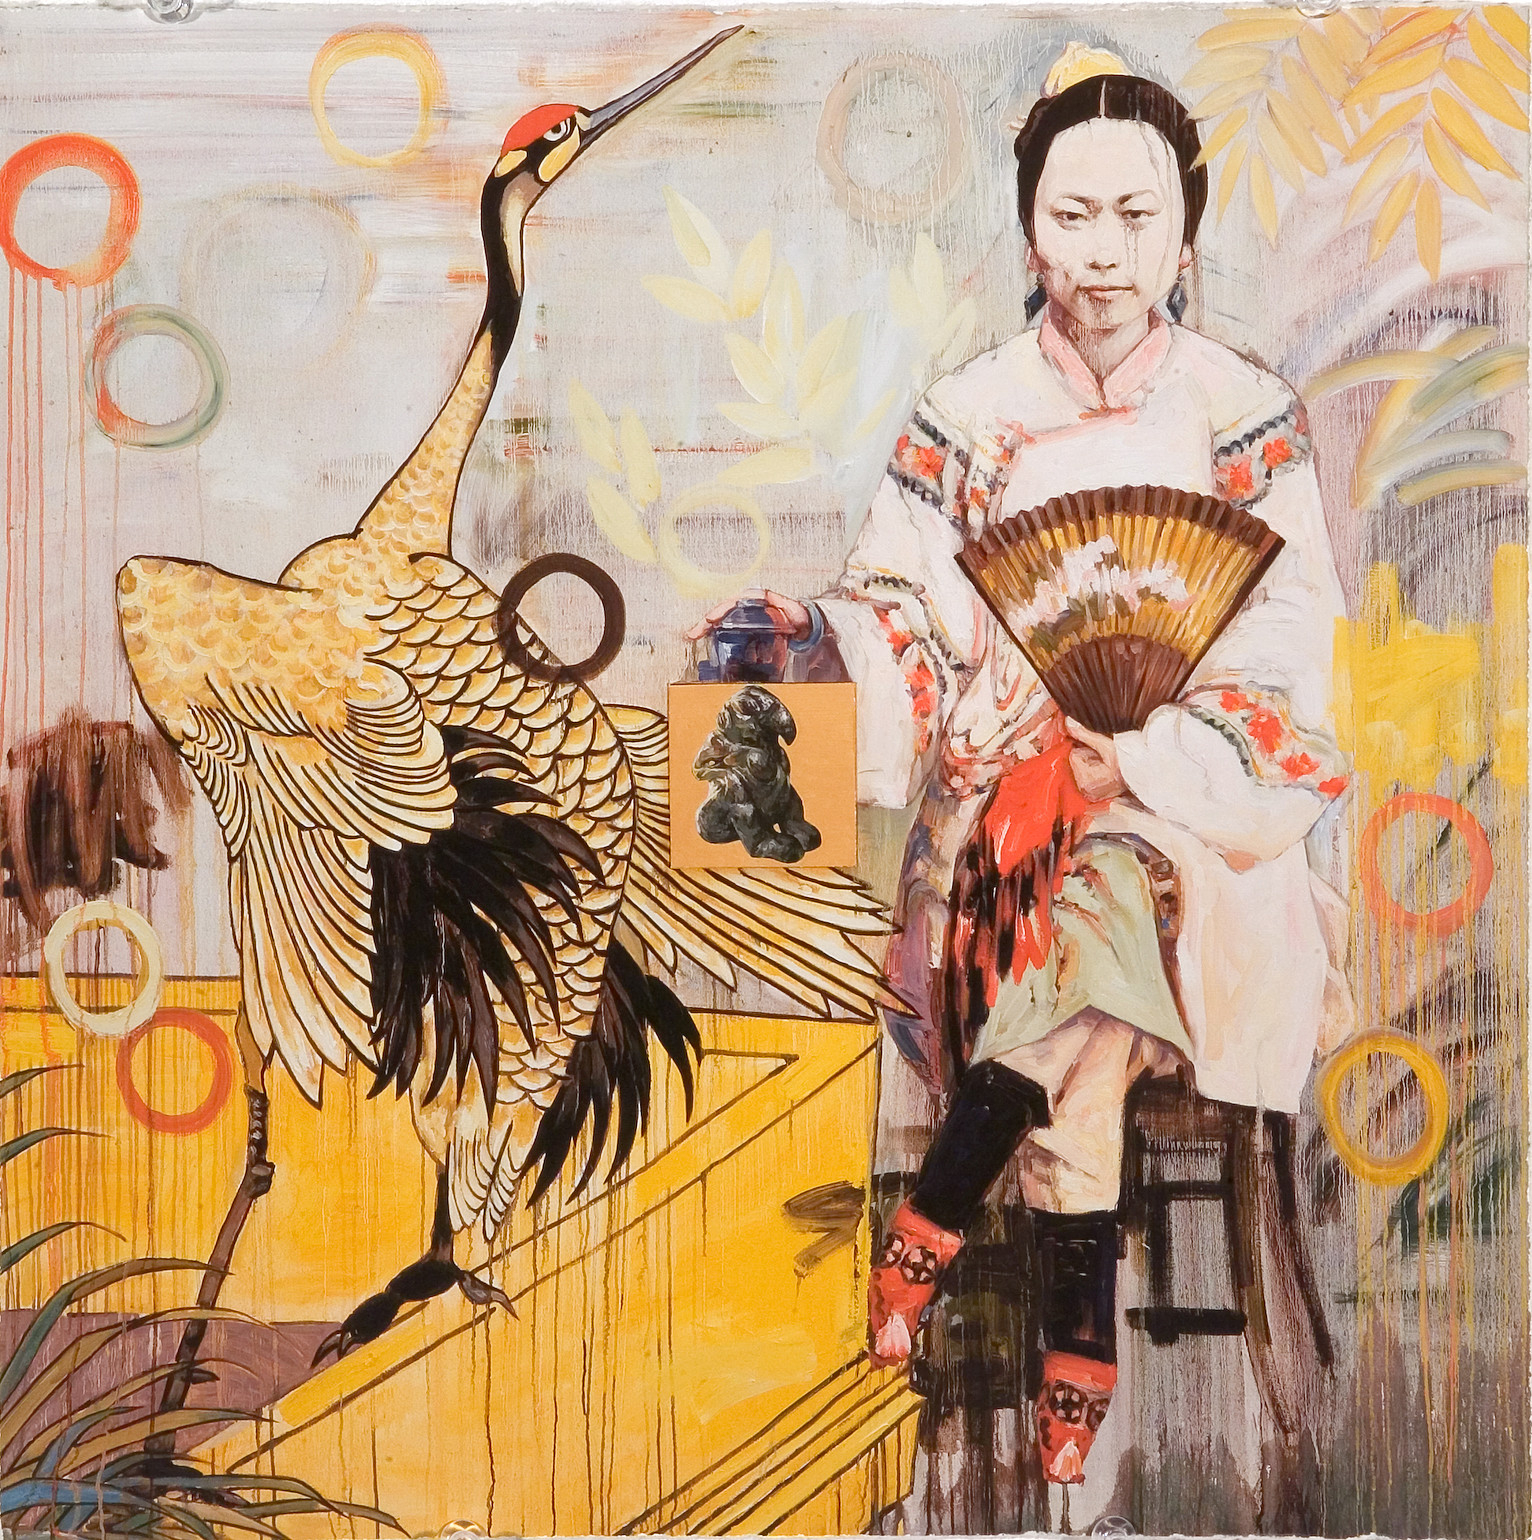 A painting of a light skinned Chinese woman with dark brown hair sitting cross-legged on a stool gazing out at the viewer. The woman wears a light pink robe with coral flowers on the sleeves. She holds a gold fan with light pink flowers. Her hand rests on a square object with a rounded lid. On the left side of the painting a white and black crane with a red crown lifts its head to the sky.